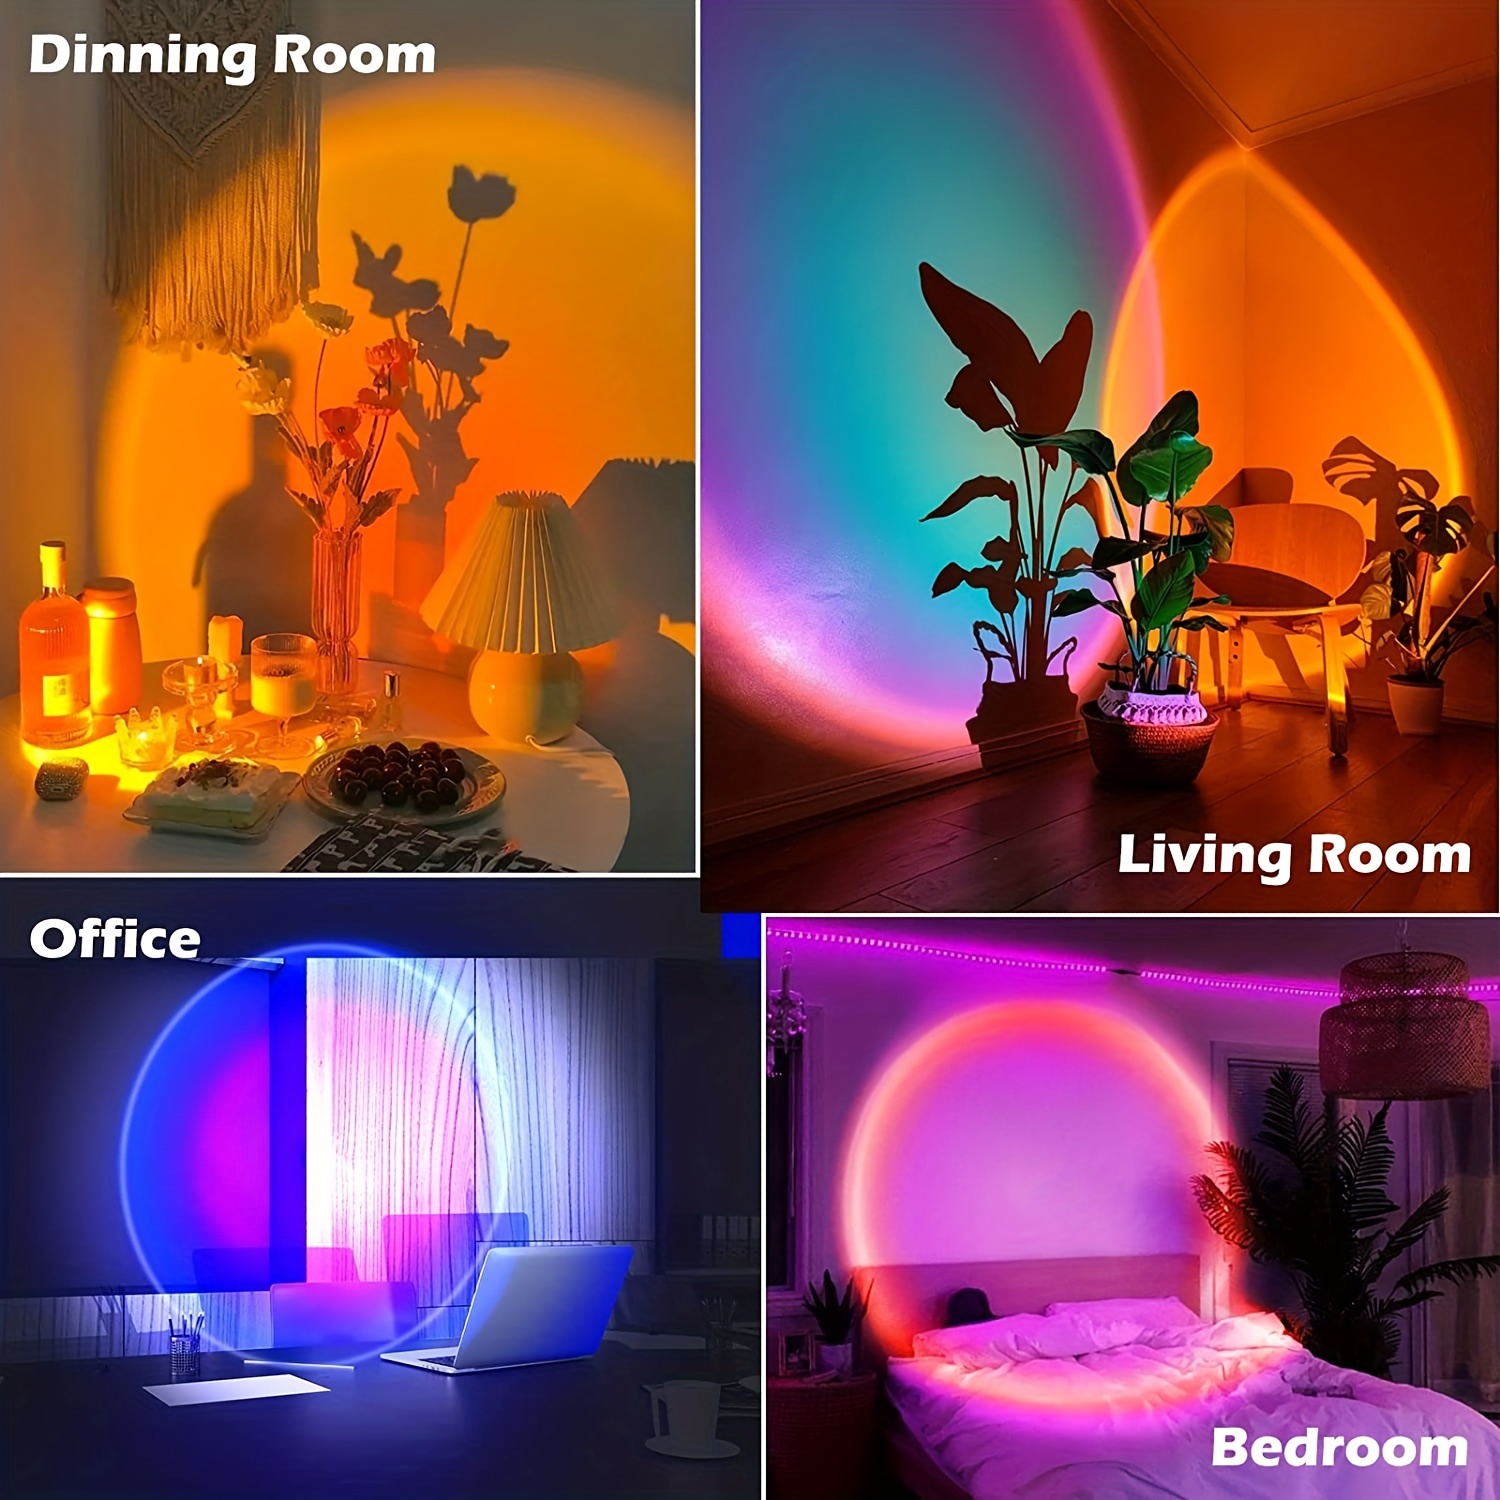 Sunset Lamp with 16 Colors, Sunset Projection Lamp with Remote，Multiple  Colors Sunset Light/Night Light for Photography/Selfie/Home/Living  Room/Bedroom Decor,Romantic Visual Gifts for Women 